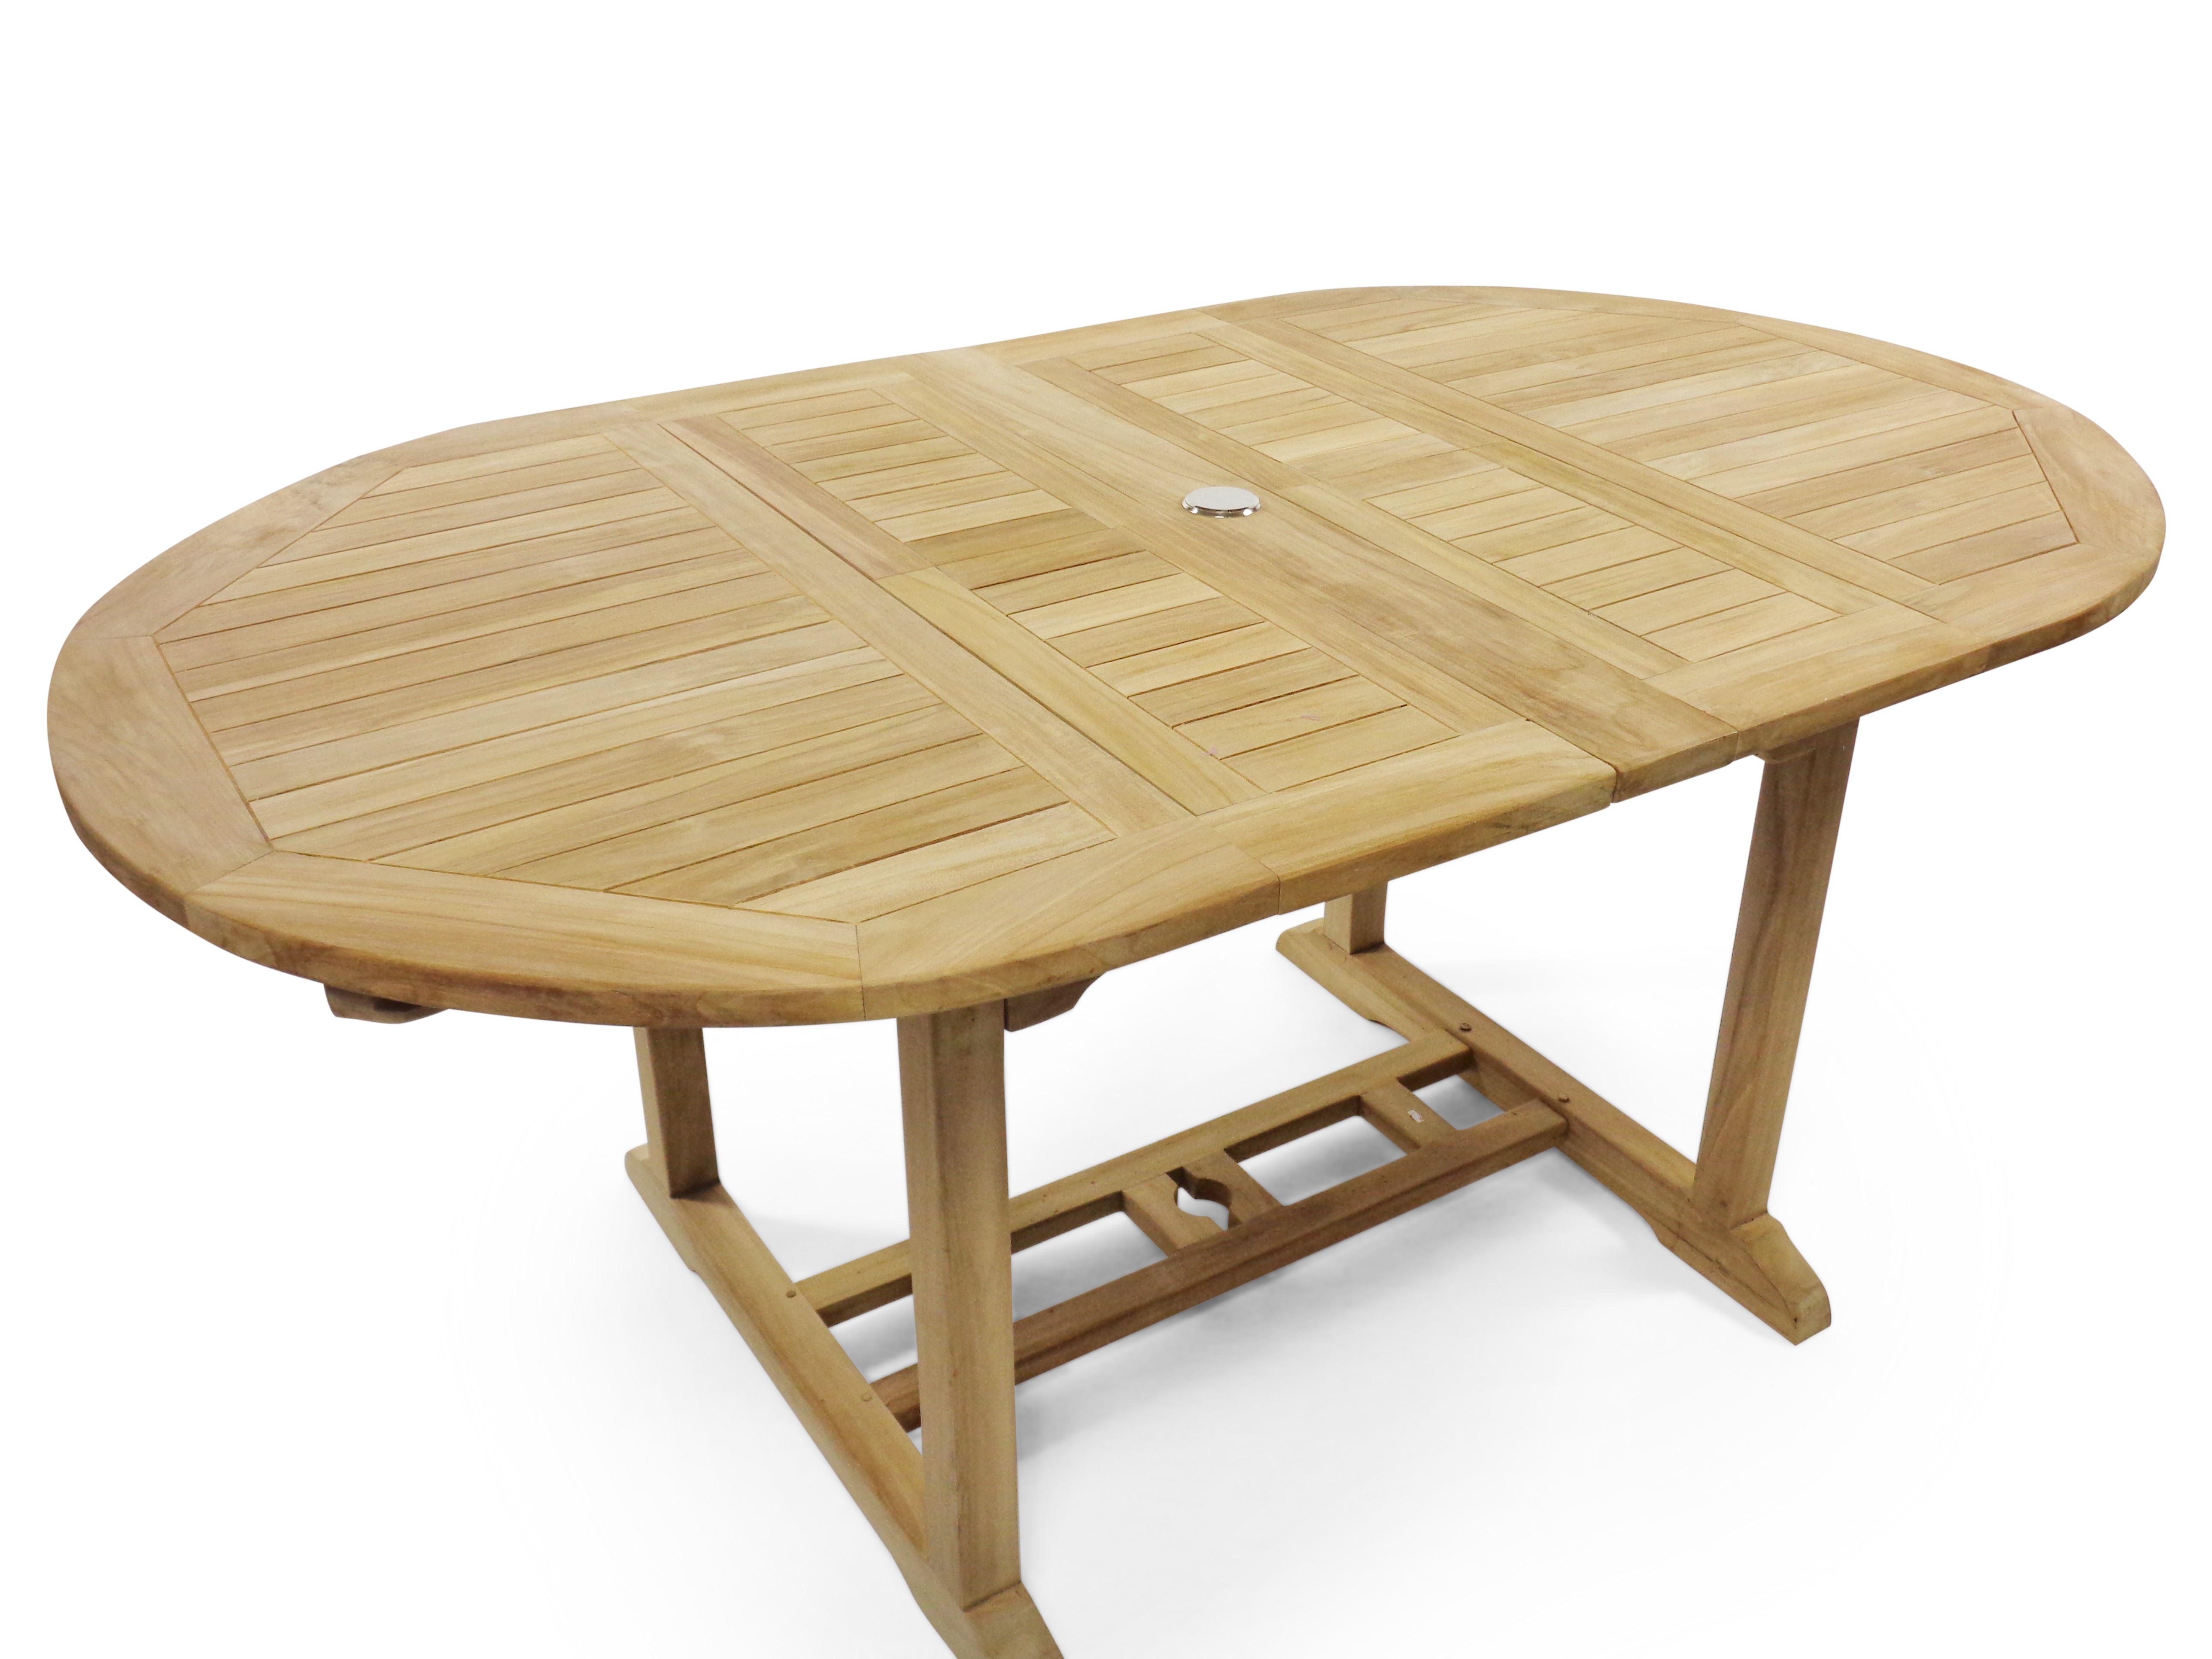 Grade A Teak Bimini Counter Height 82" x 39" Double Leaf Oval Extension Table...Seats 8...makes 3 Different Size Tables